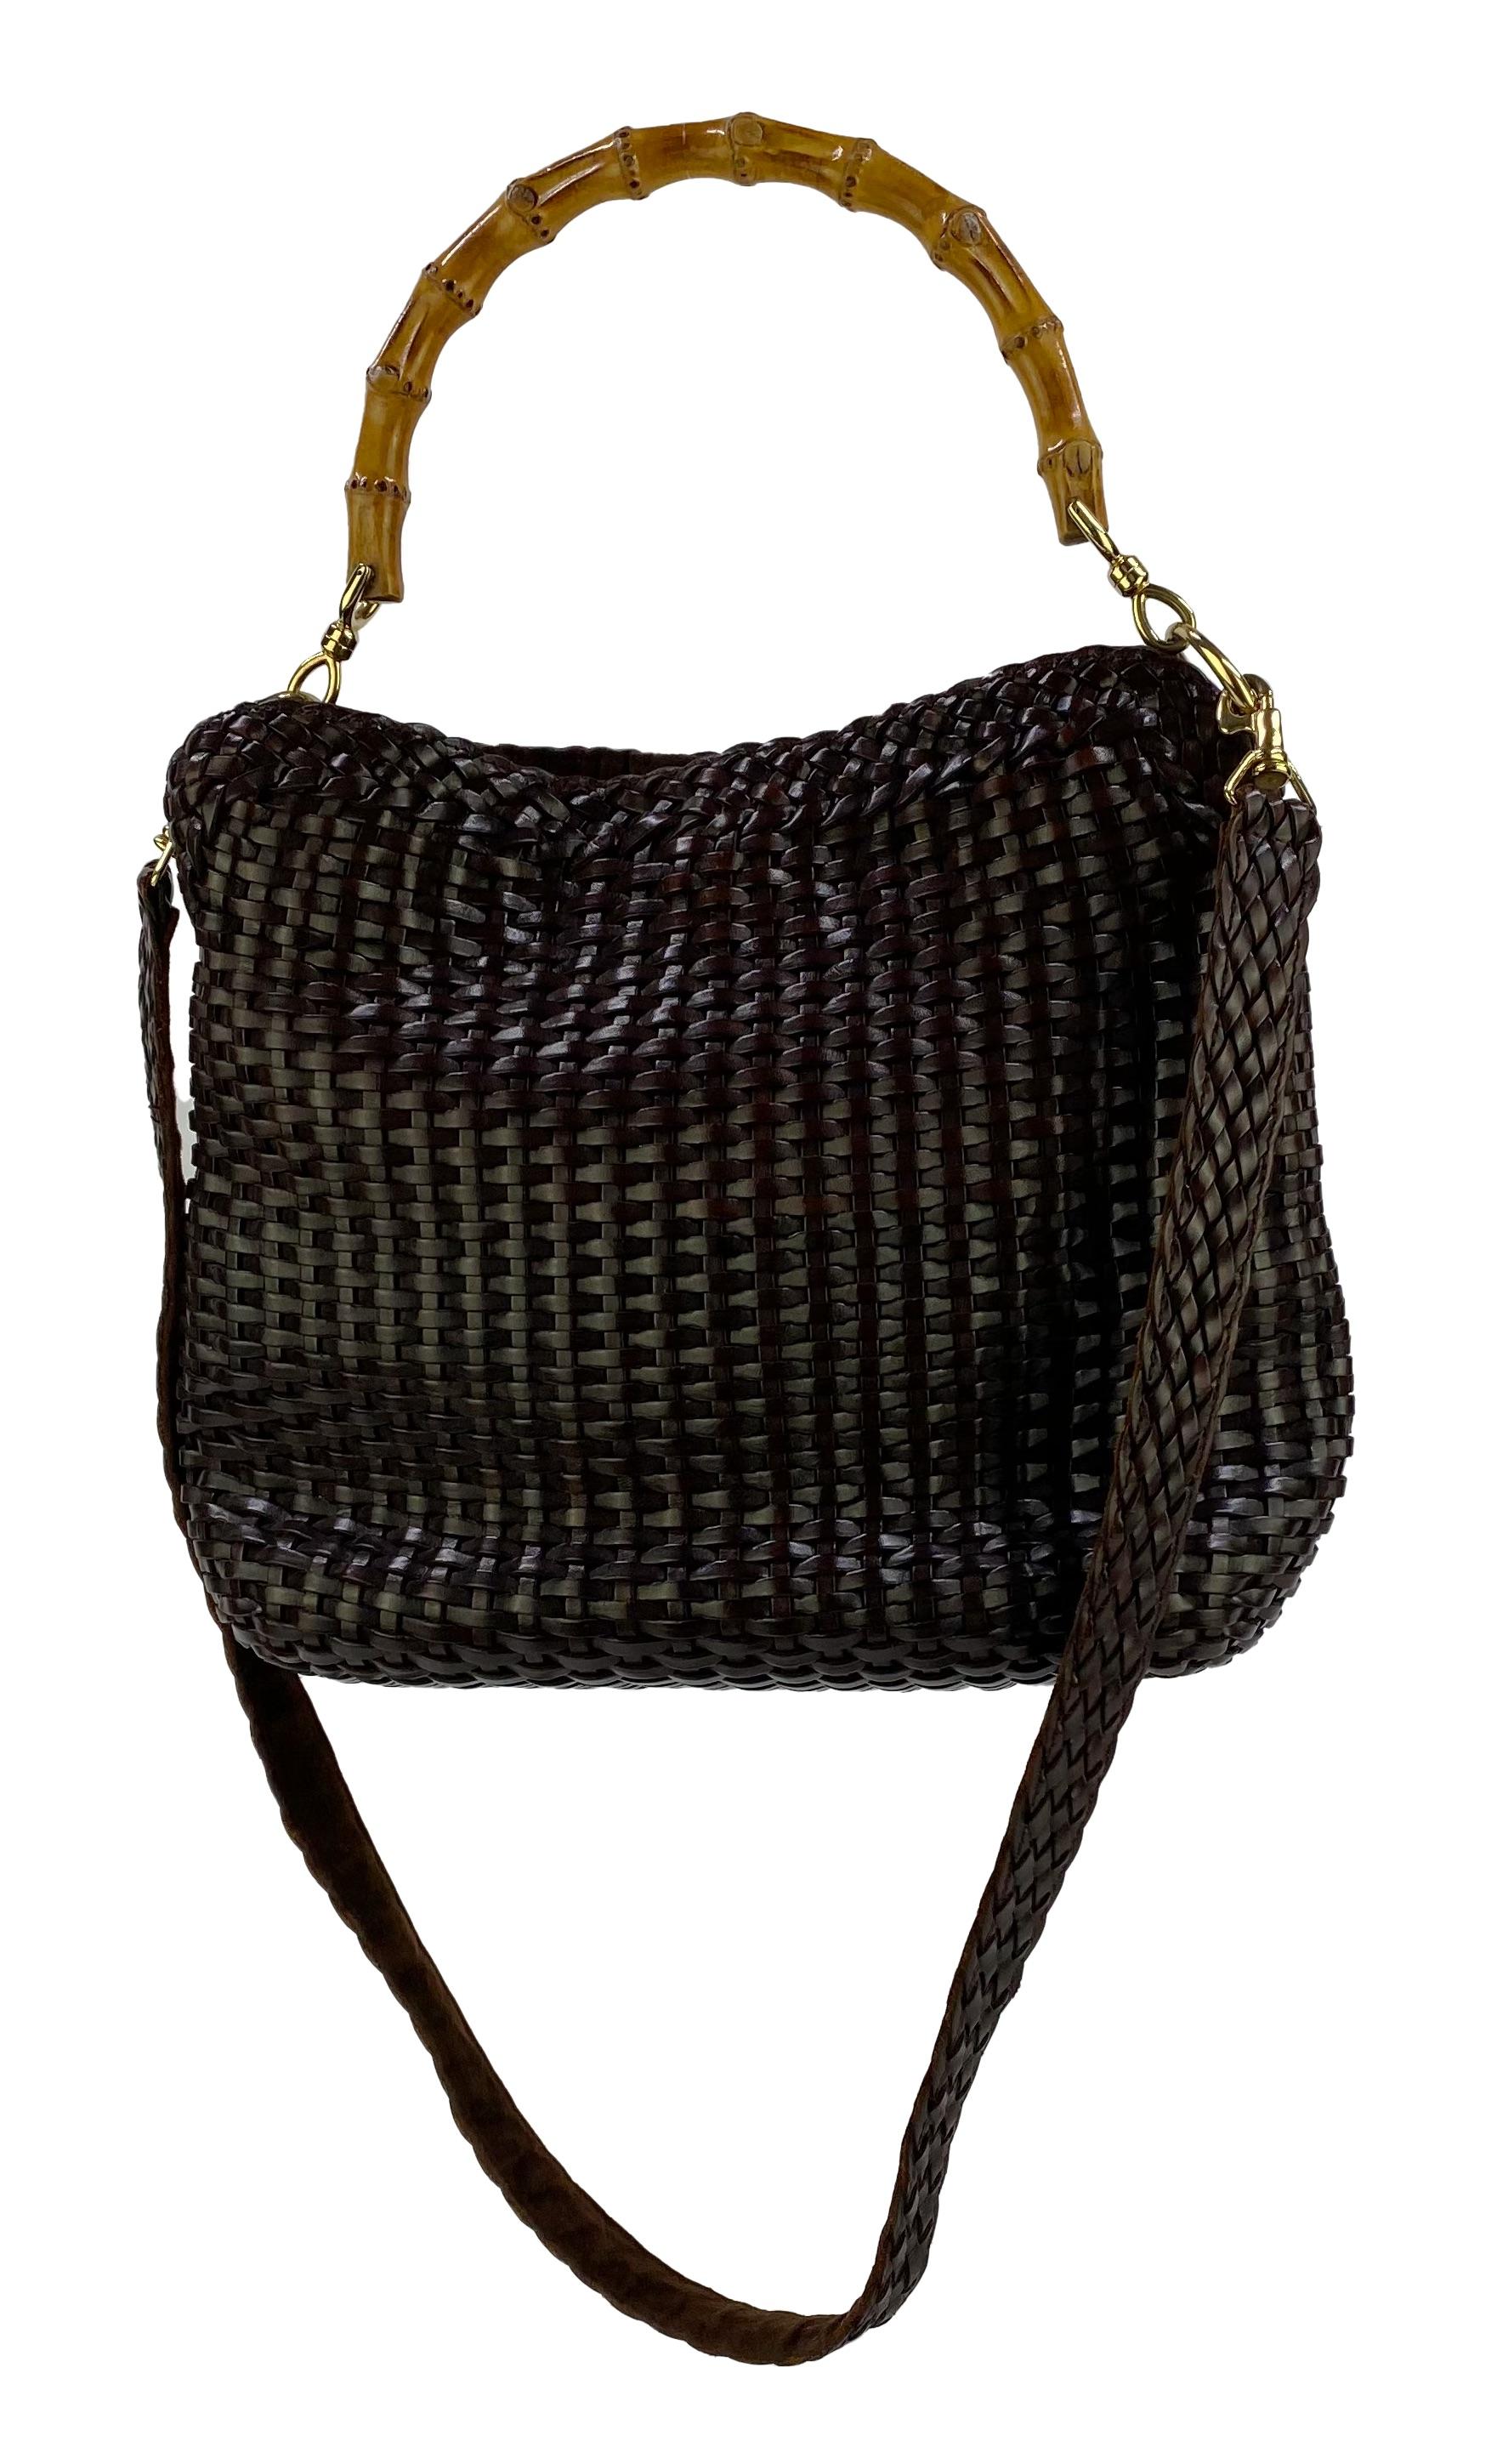 S/S 1997 Gucci by Tom Ford Woven Brown Leather Hobo Bamboo Bag with ...